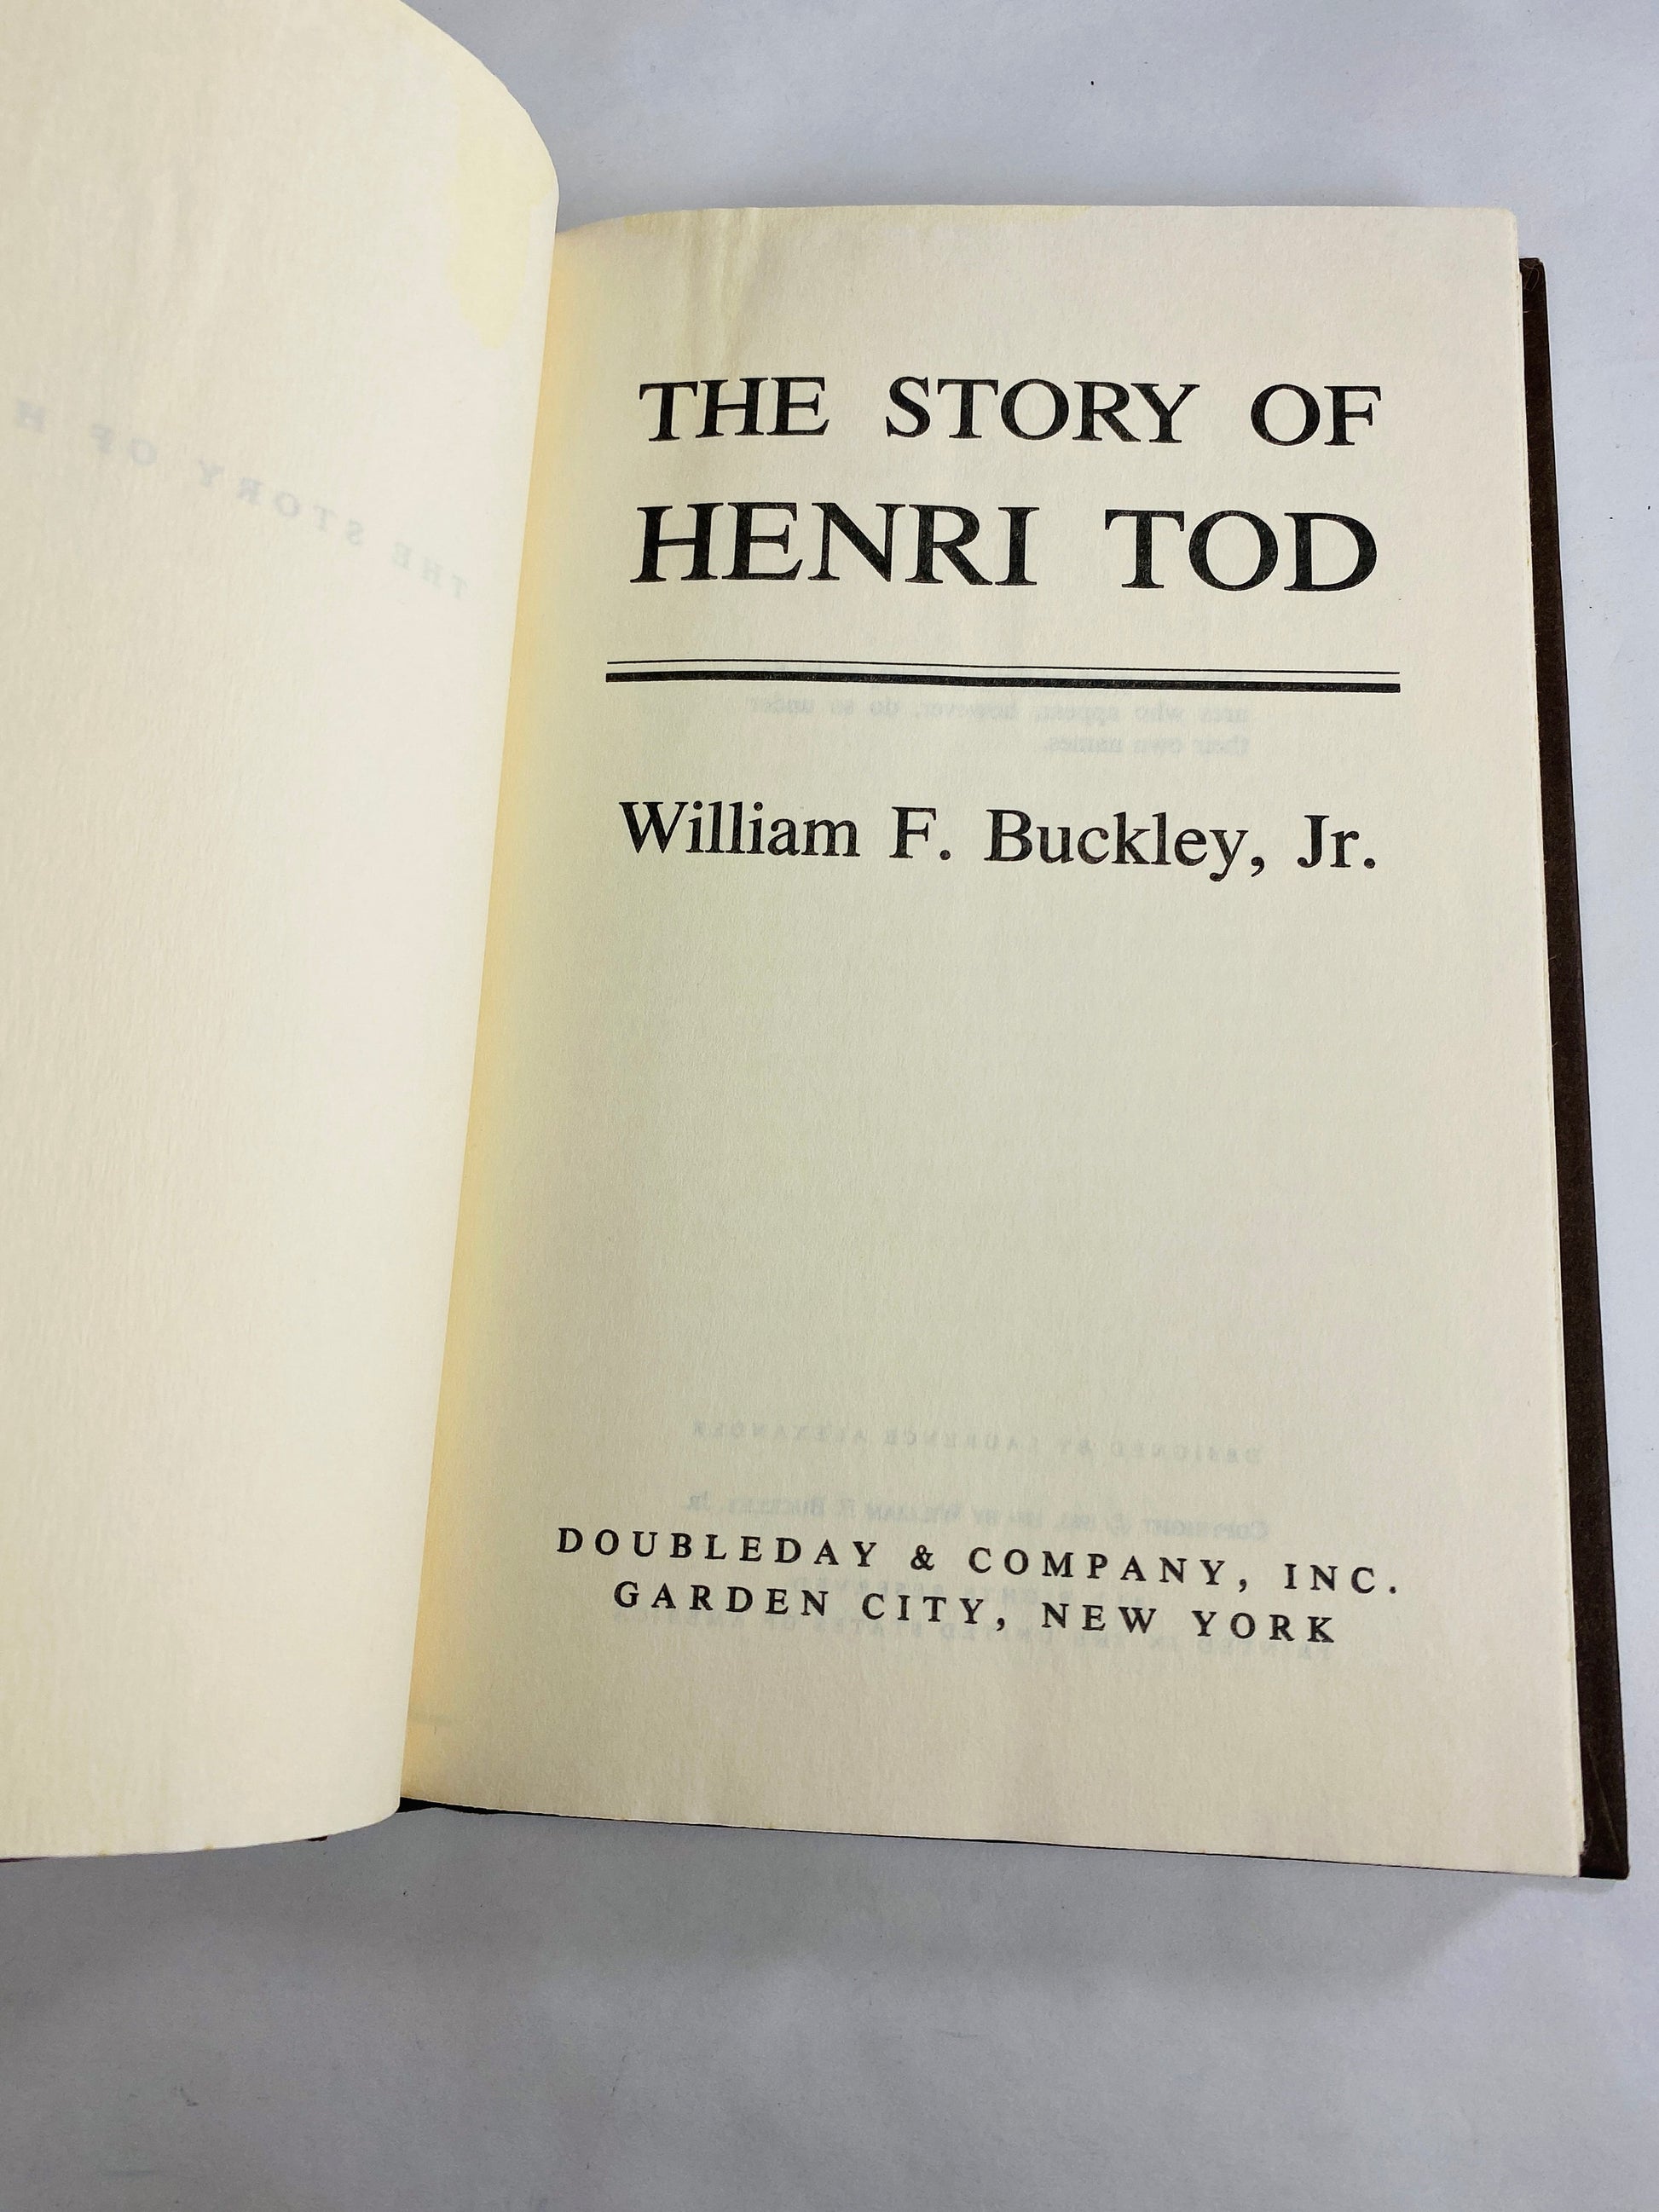 Story of Henri Tod by William F Buckley vintage book circa 1984 set in East Germany. Brown bookshelf decor